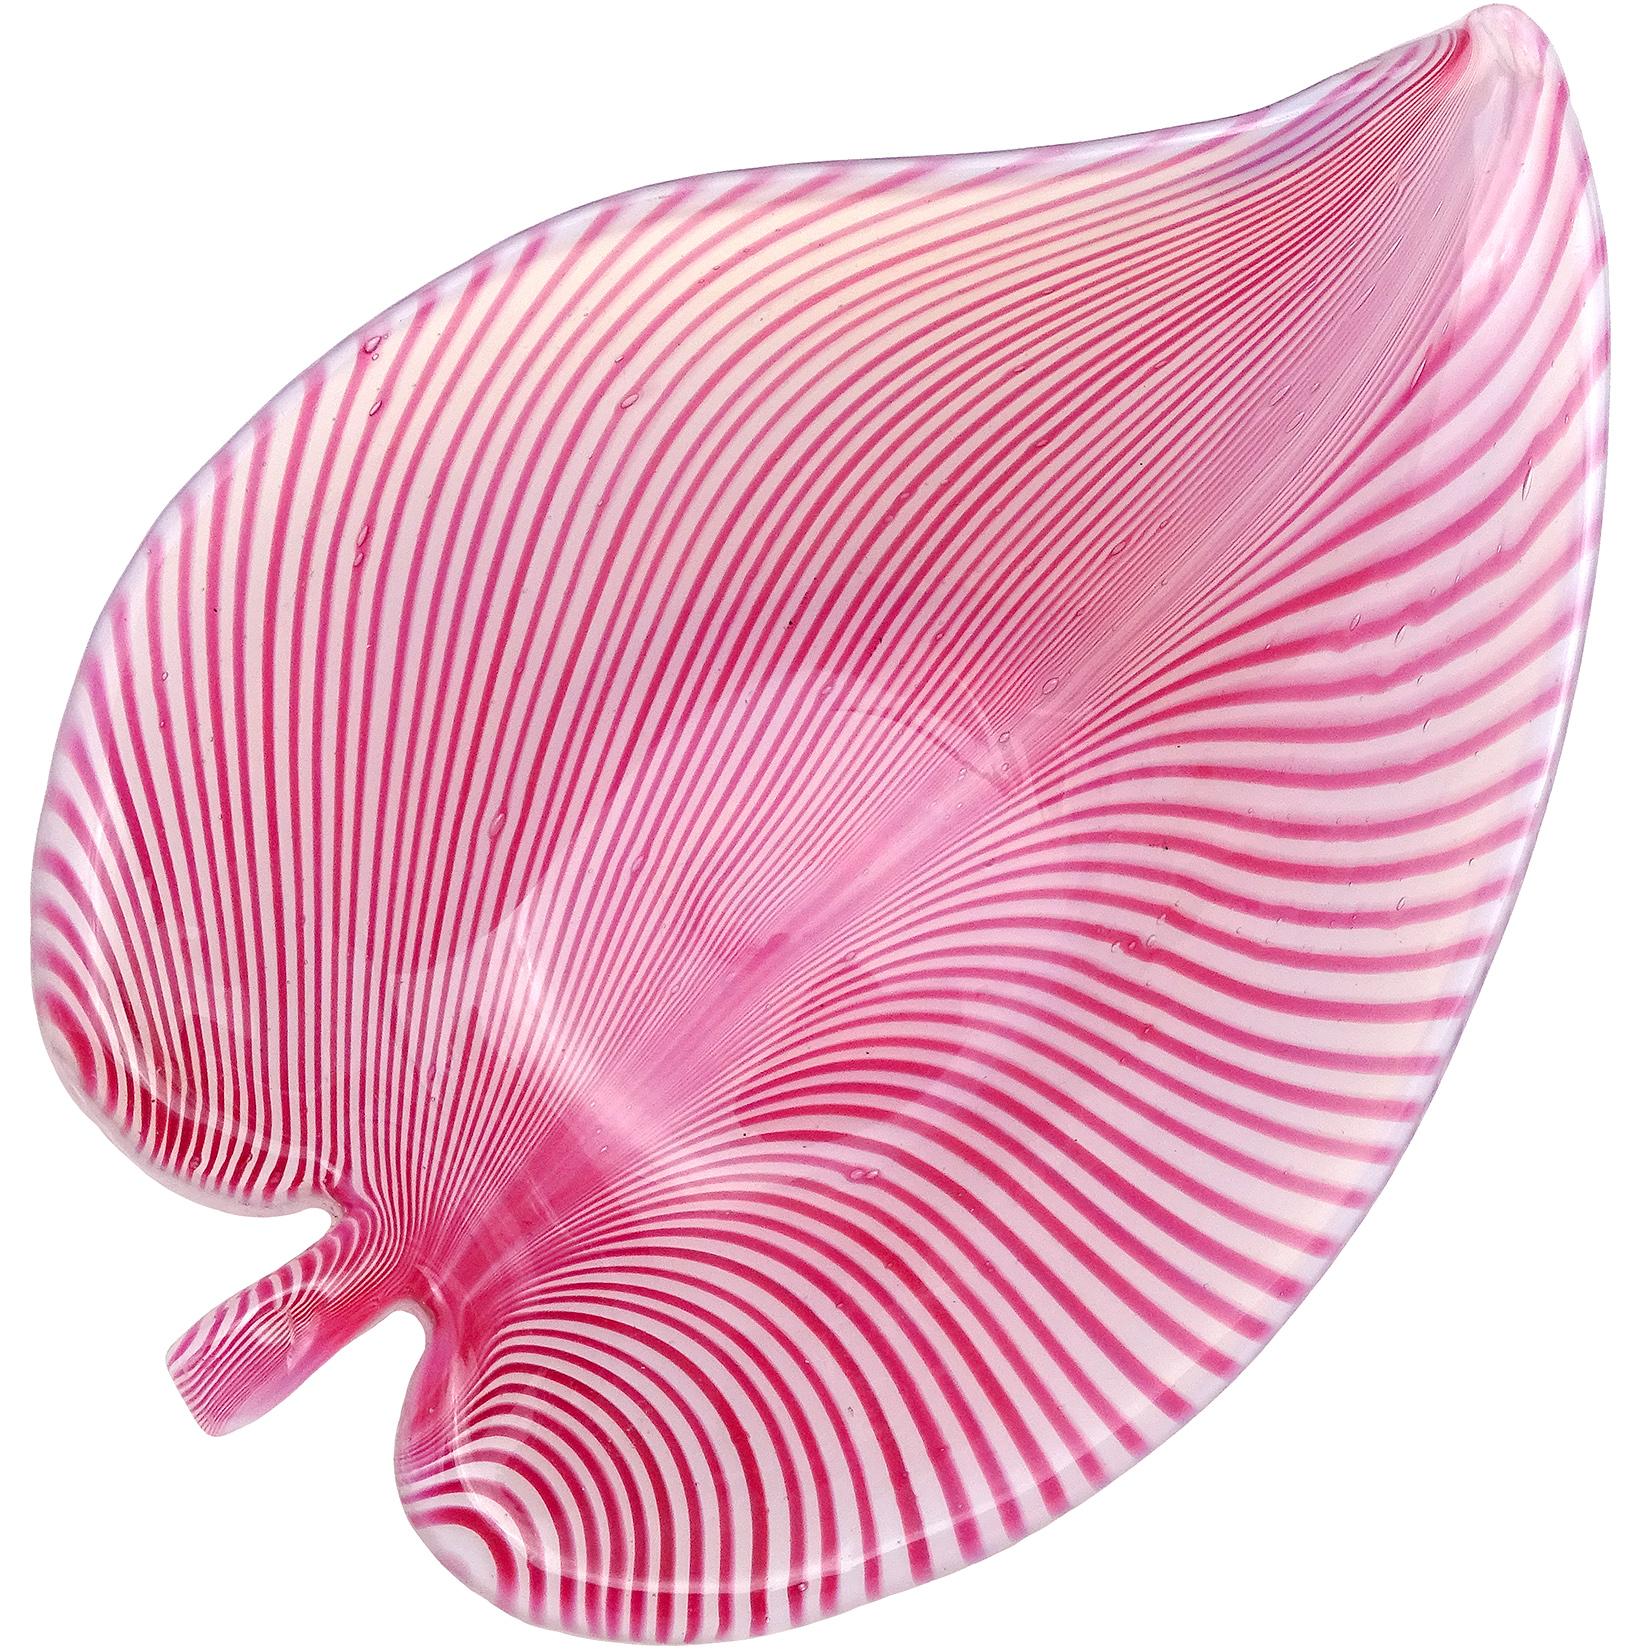 Murano Opalescent White Pink Pulled Feather Design Italian Art Glass Leaf Bowl